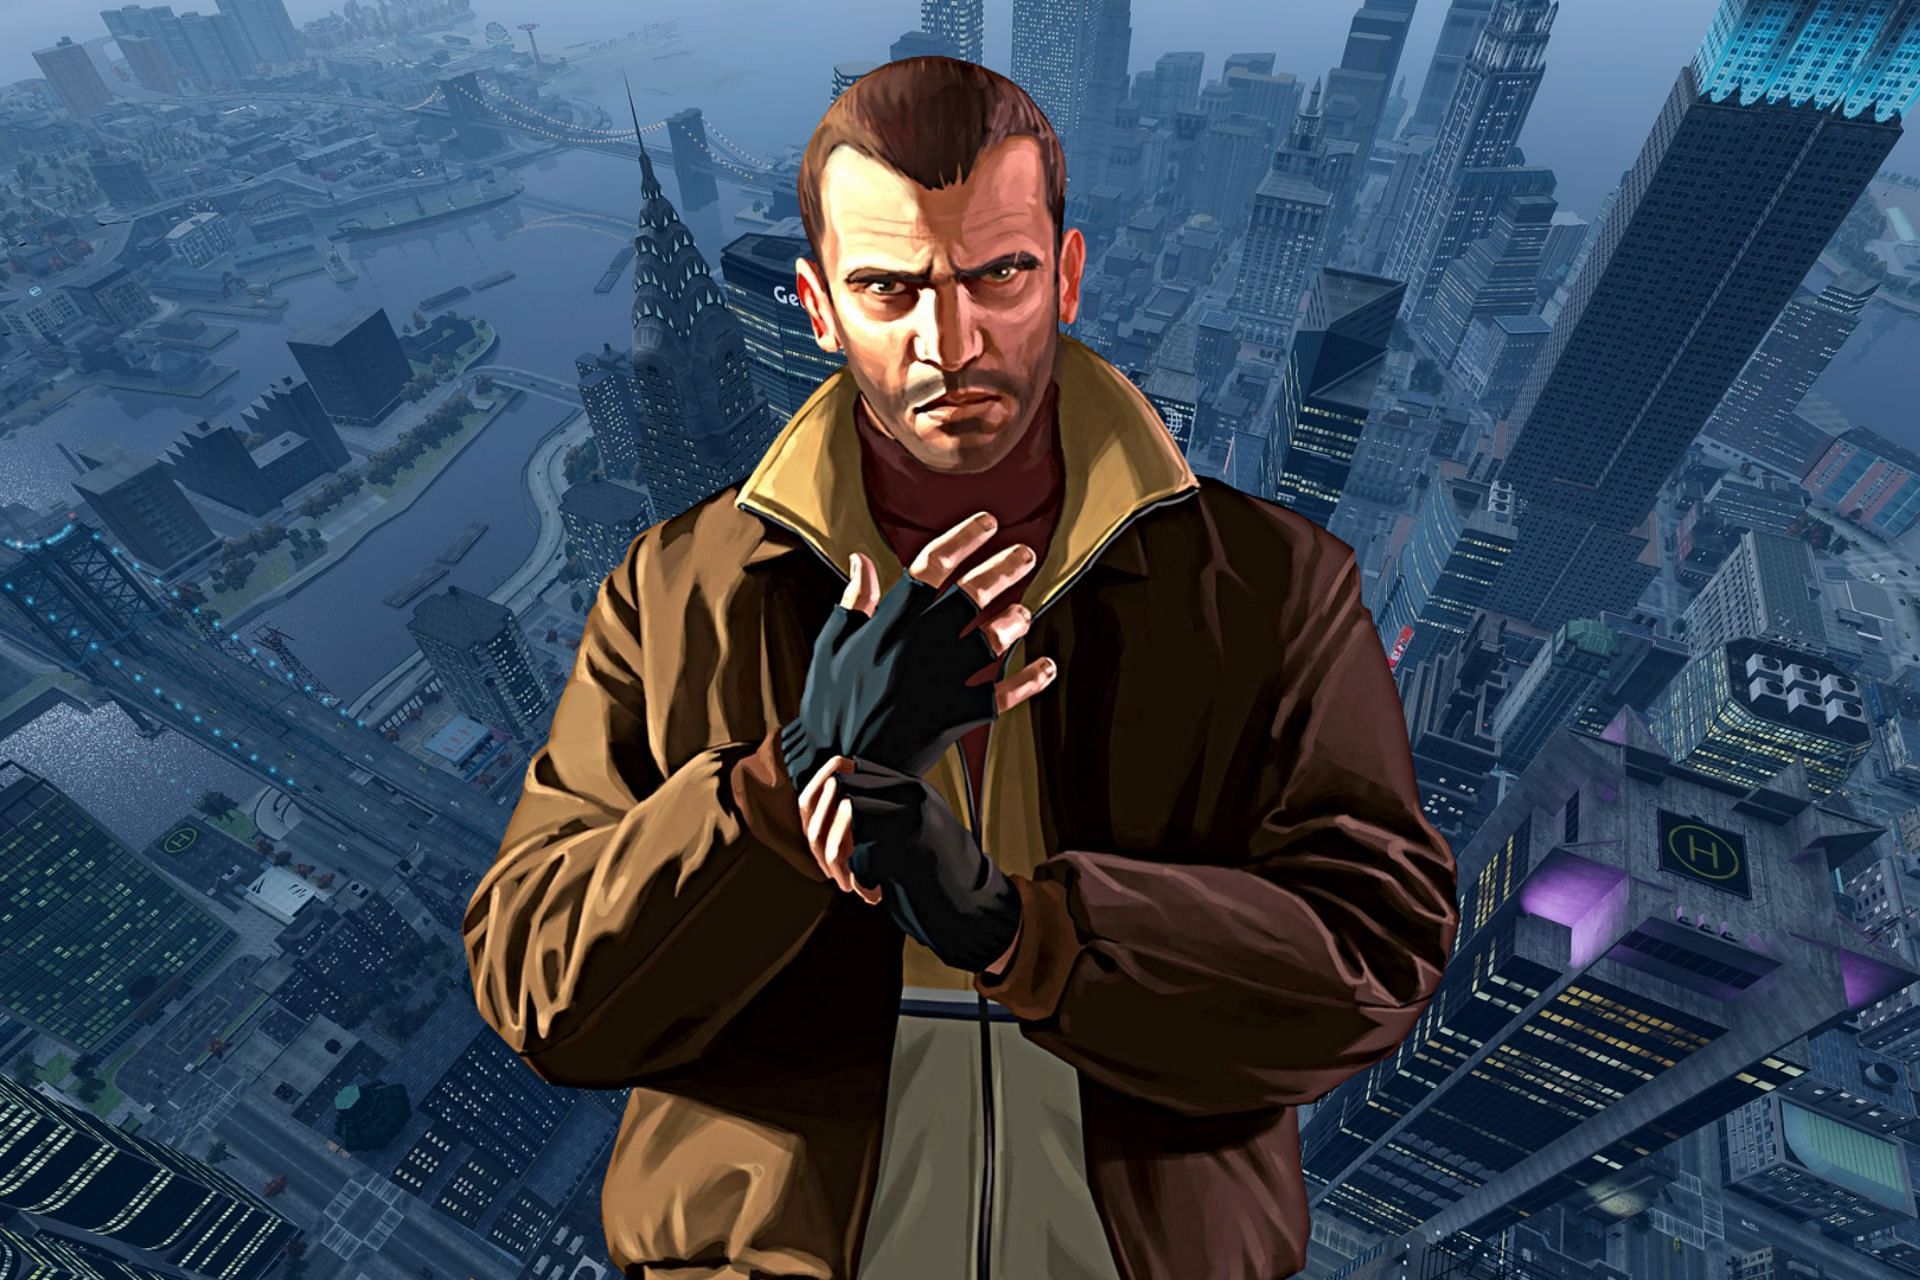 GTA 4 features that players want in GTA 6